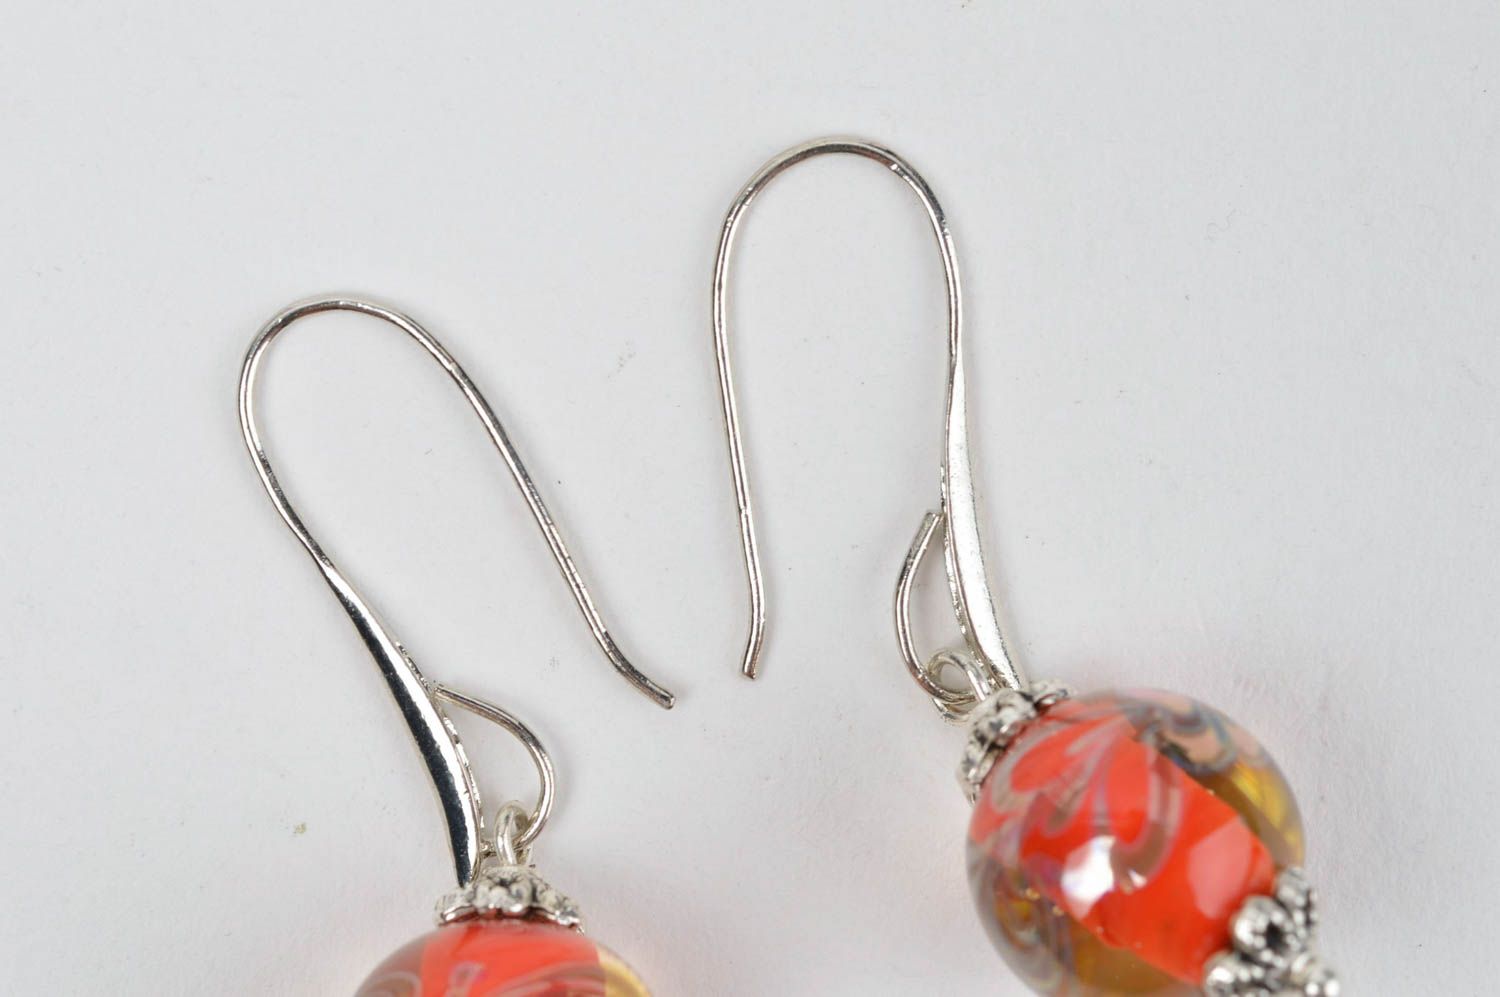 Handmade earrings with charms glass earrings lampwork accessories glass jewelry photo 4